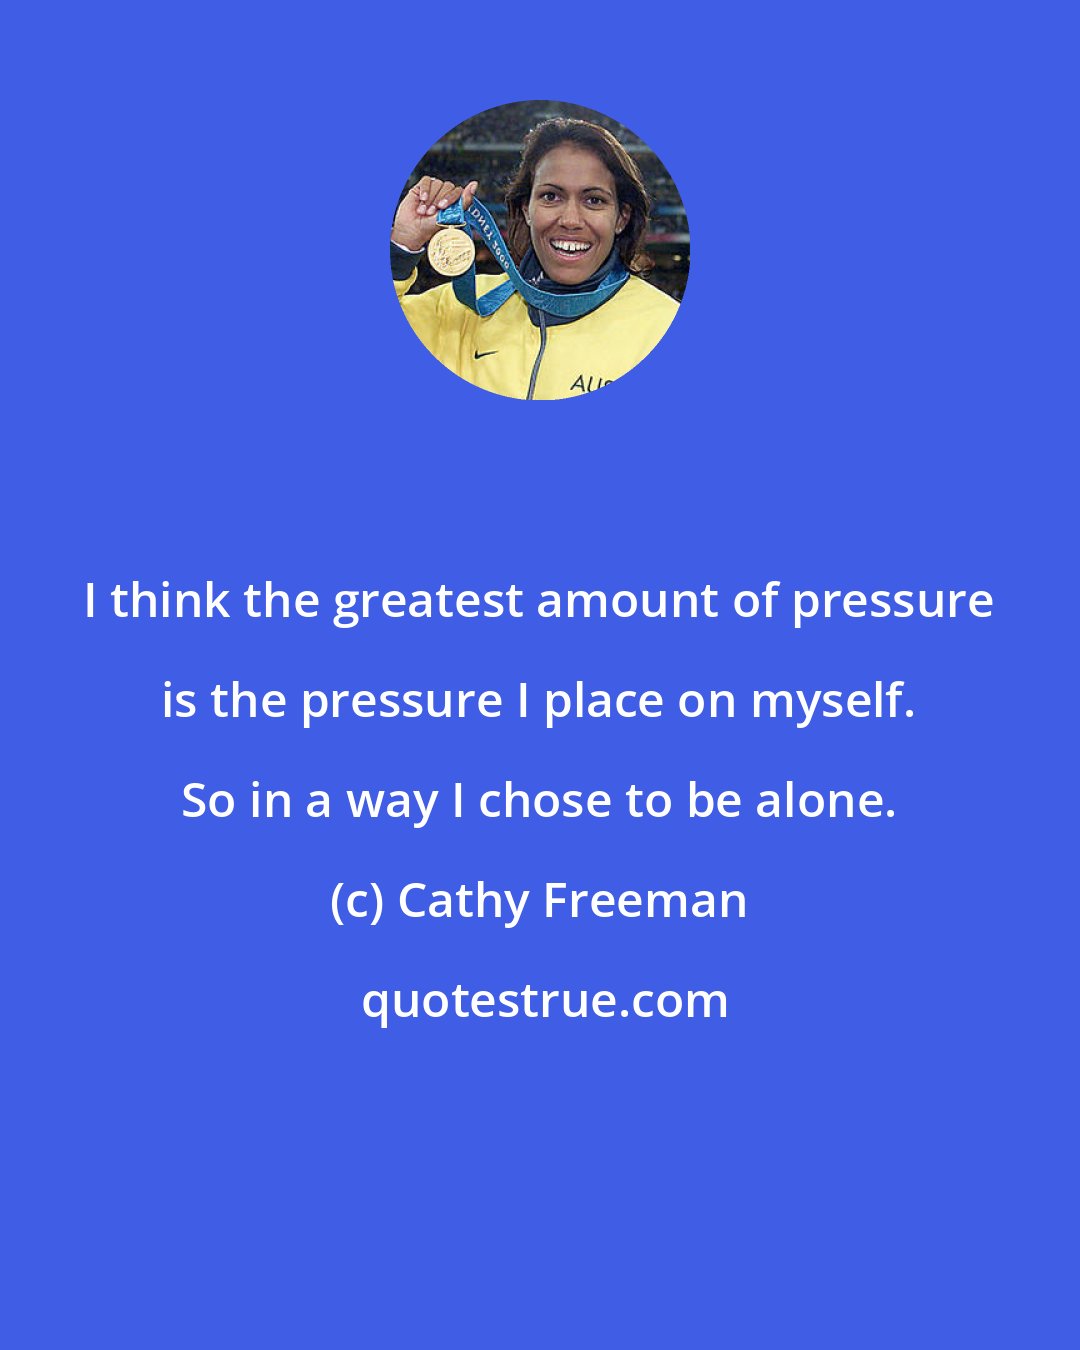 Cathy Freeman: I think the greatest amount of pressure is the pressure I place on myself. So in a way I chose to be alone.